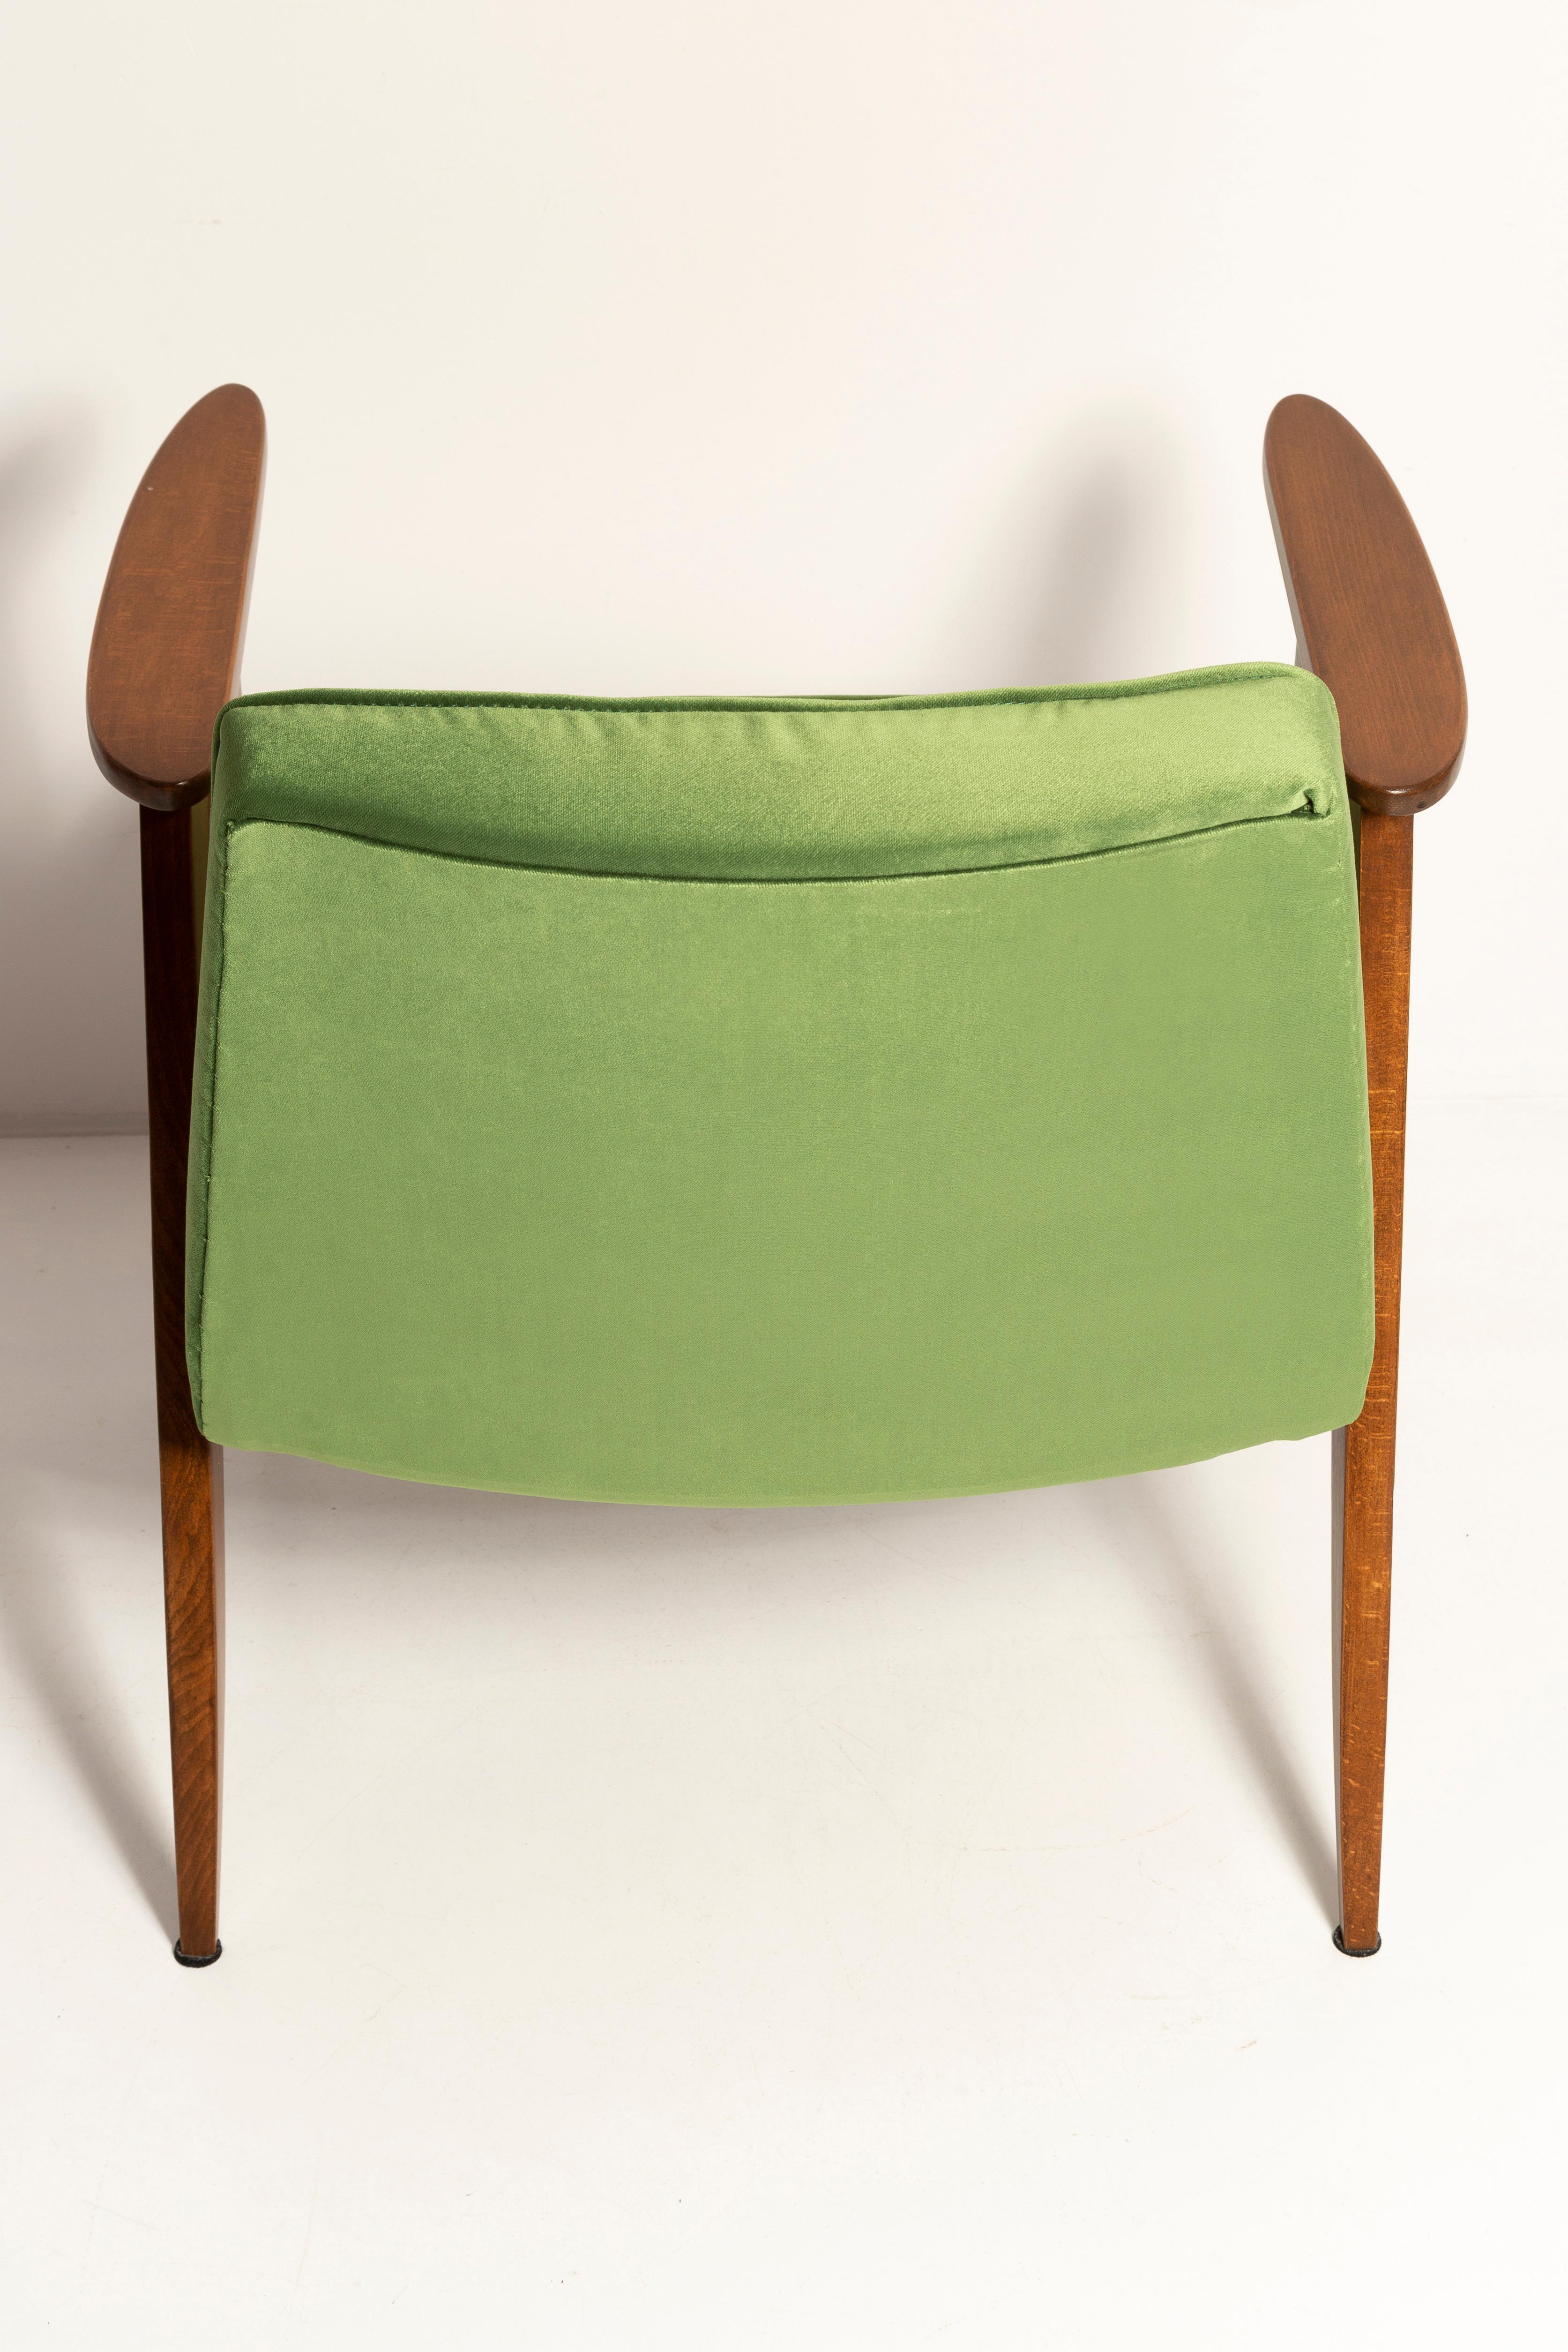 Pair of Mid-Century 366 Armchairs, Green and Orange, by Chierowski Europe, 1960s For Sale 1